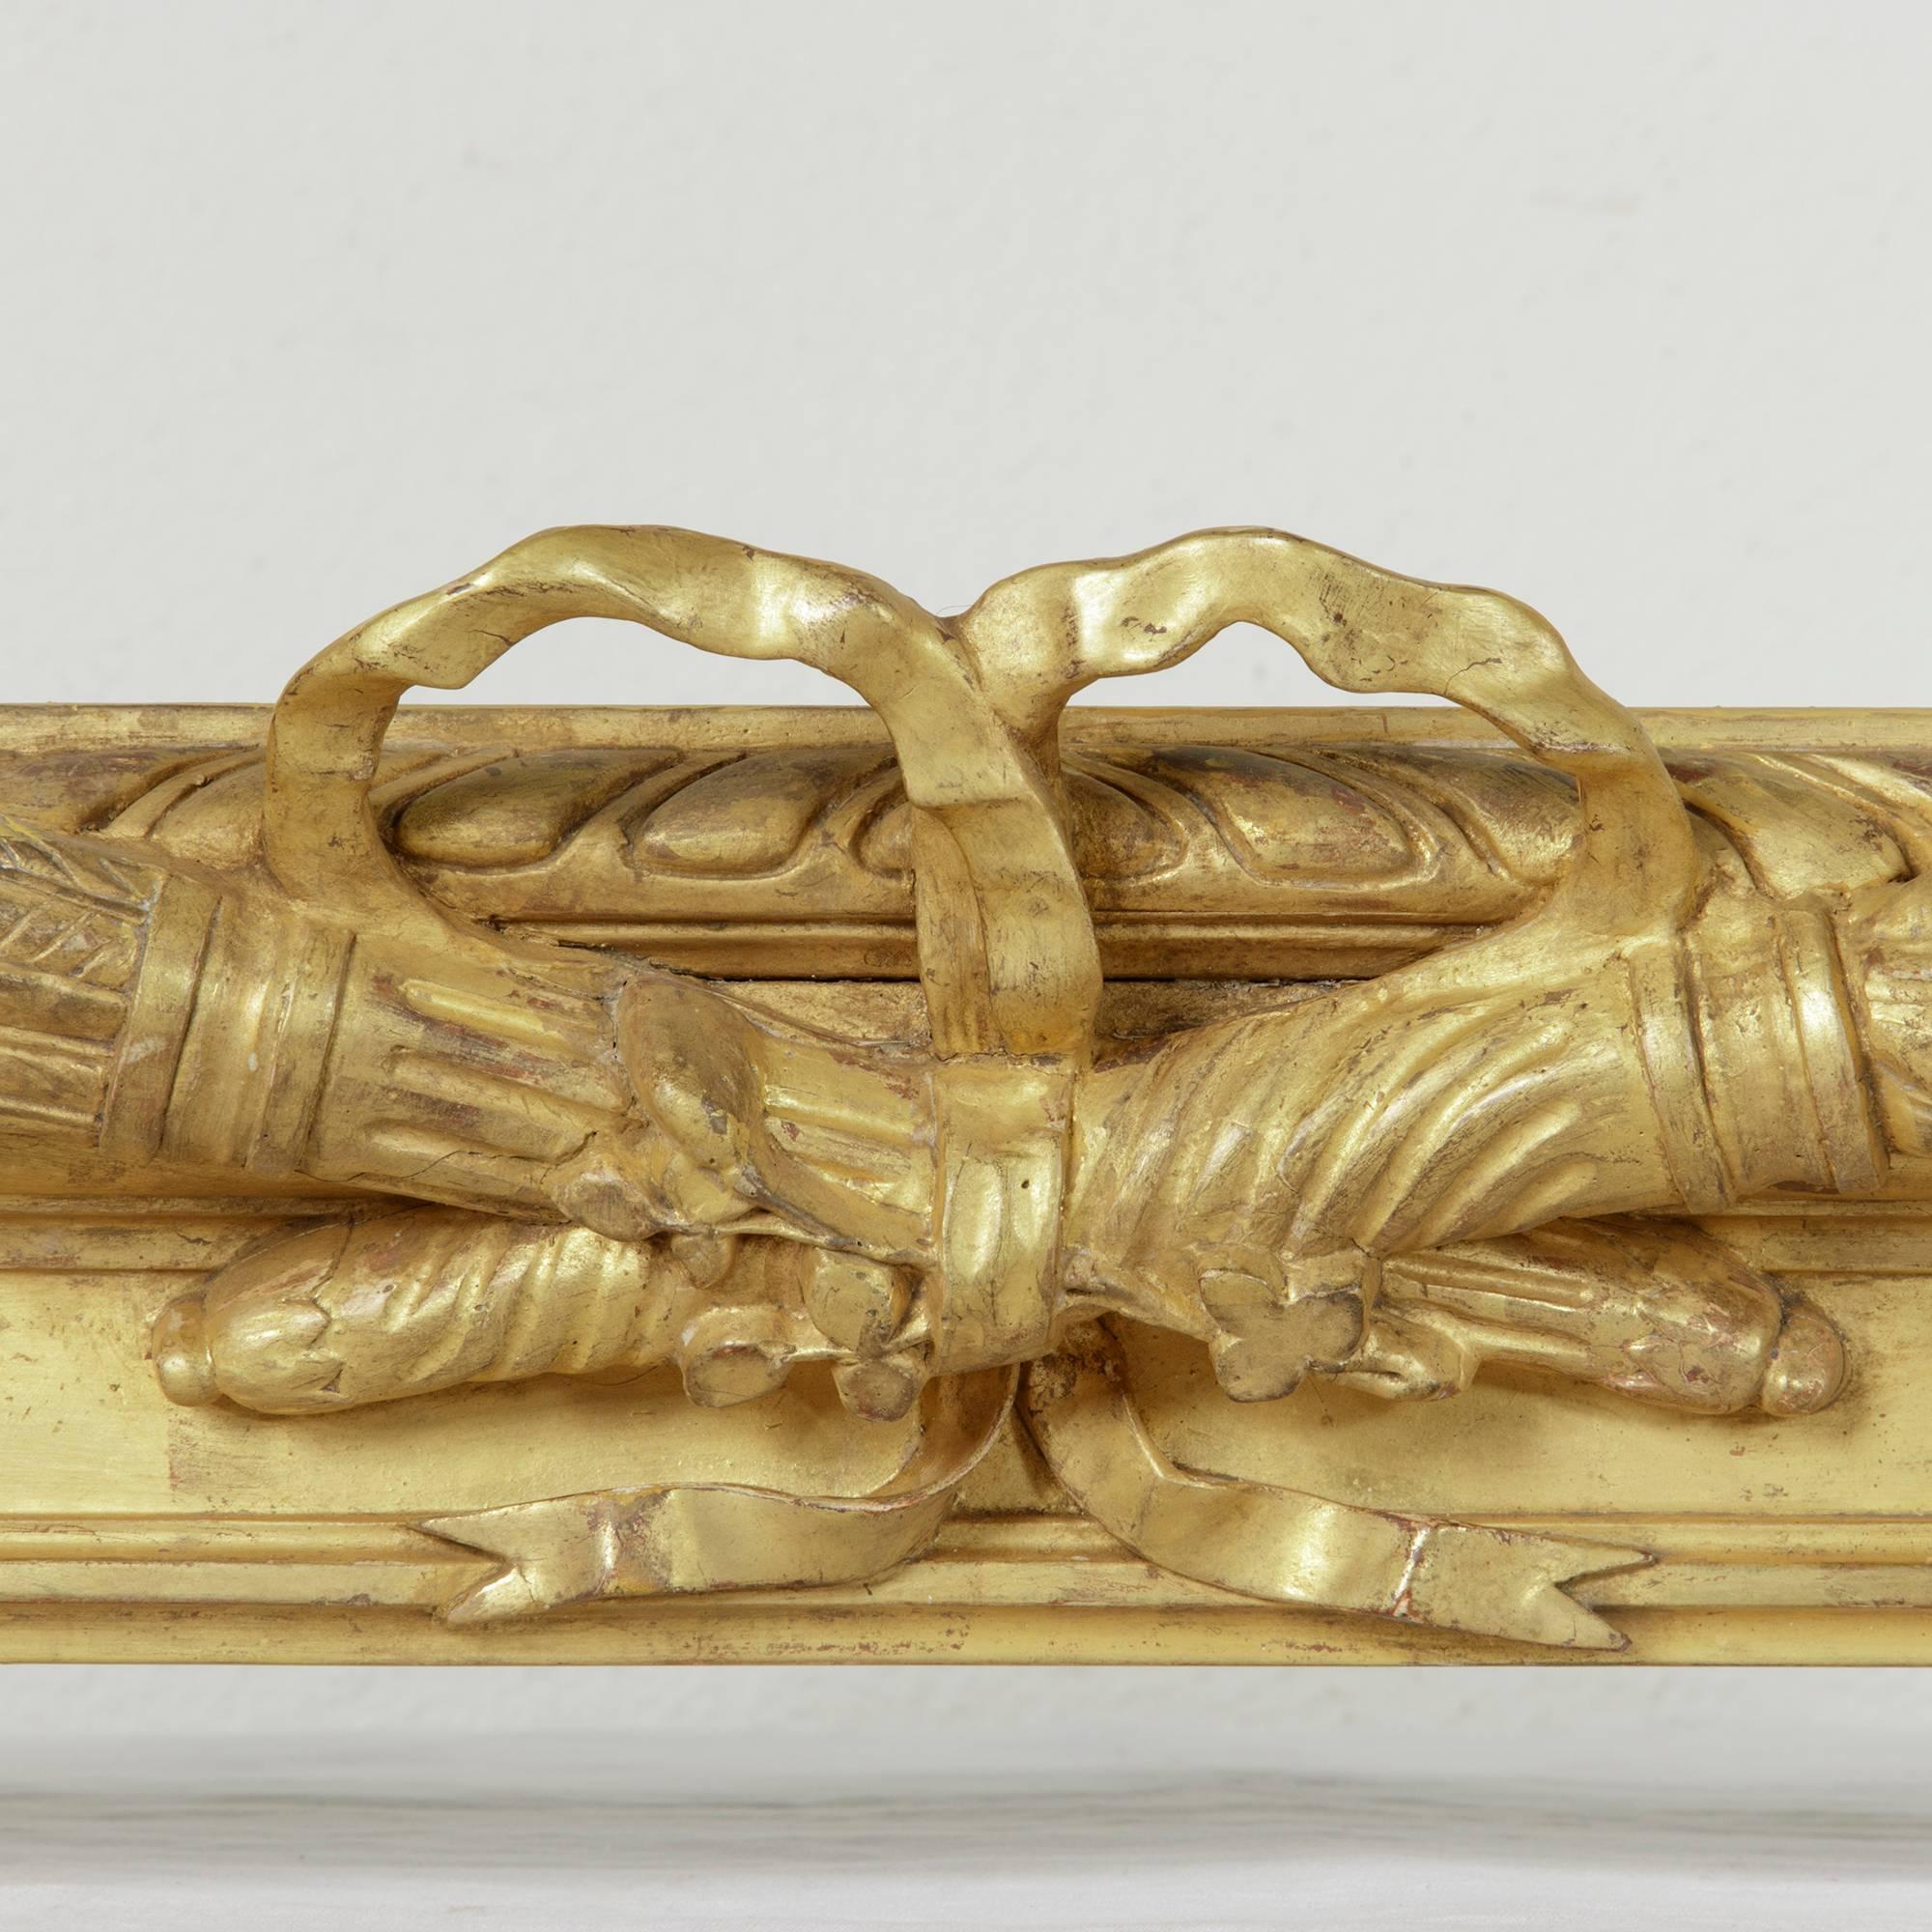 This stunning pair of 19th century window cornices of hand-carved giltwood was originally used as drapery valances in a French chateau. Featuring a Classic Louis XVI motif of crossed torch and quiver with knotted bow and ribbon, this rare pair will